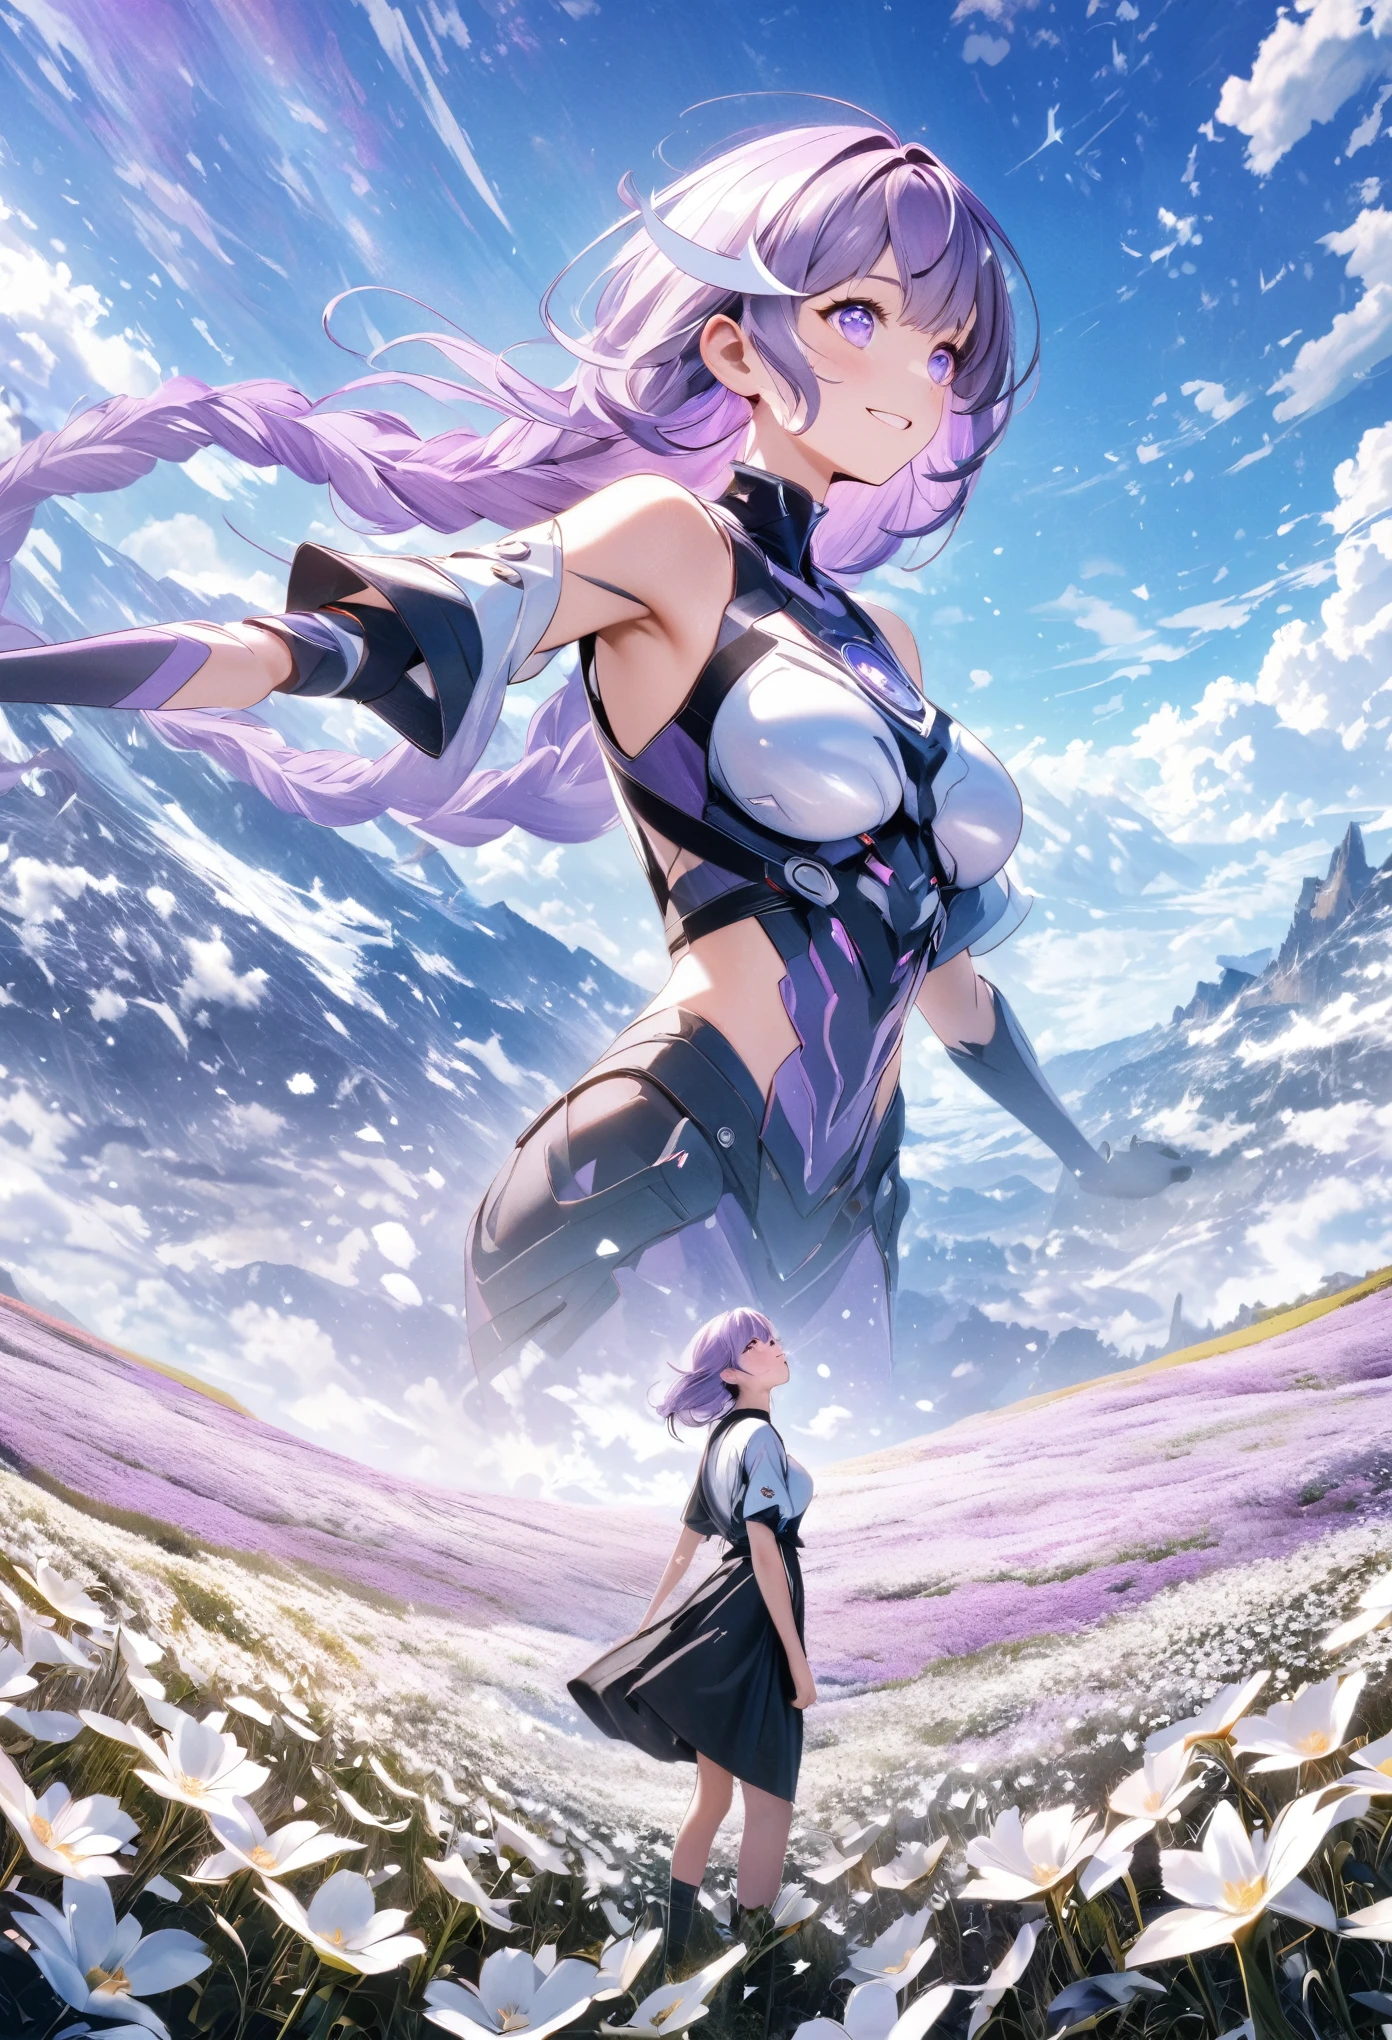 Wide open field of white flowers landscape photo, A purple-haired girl stands in a flower field and looks up at the blue sky, Art Graphic Art, professional, 4k, Very detailed